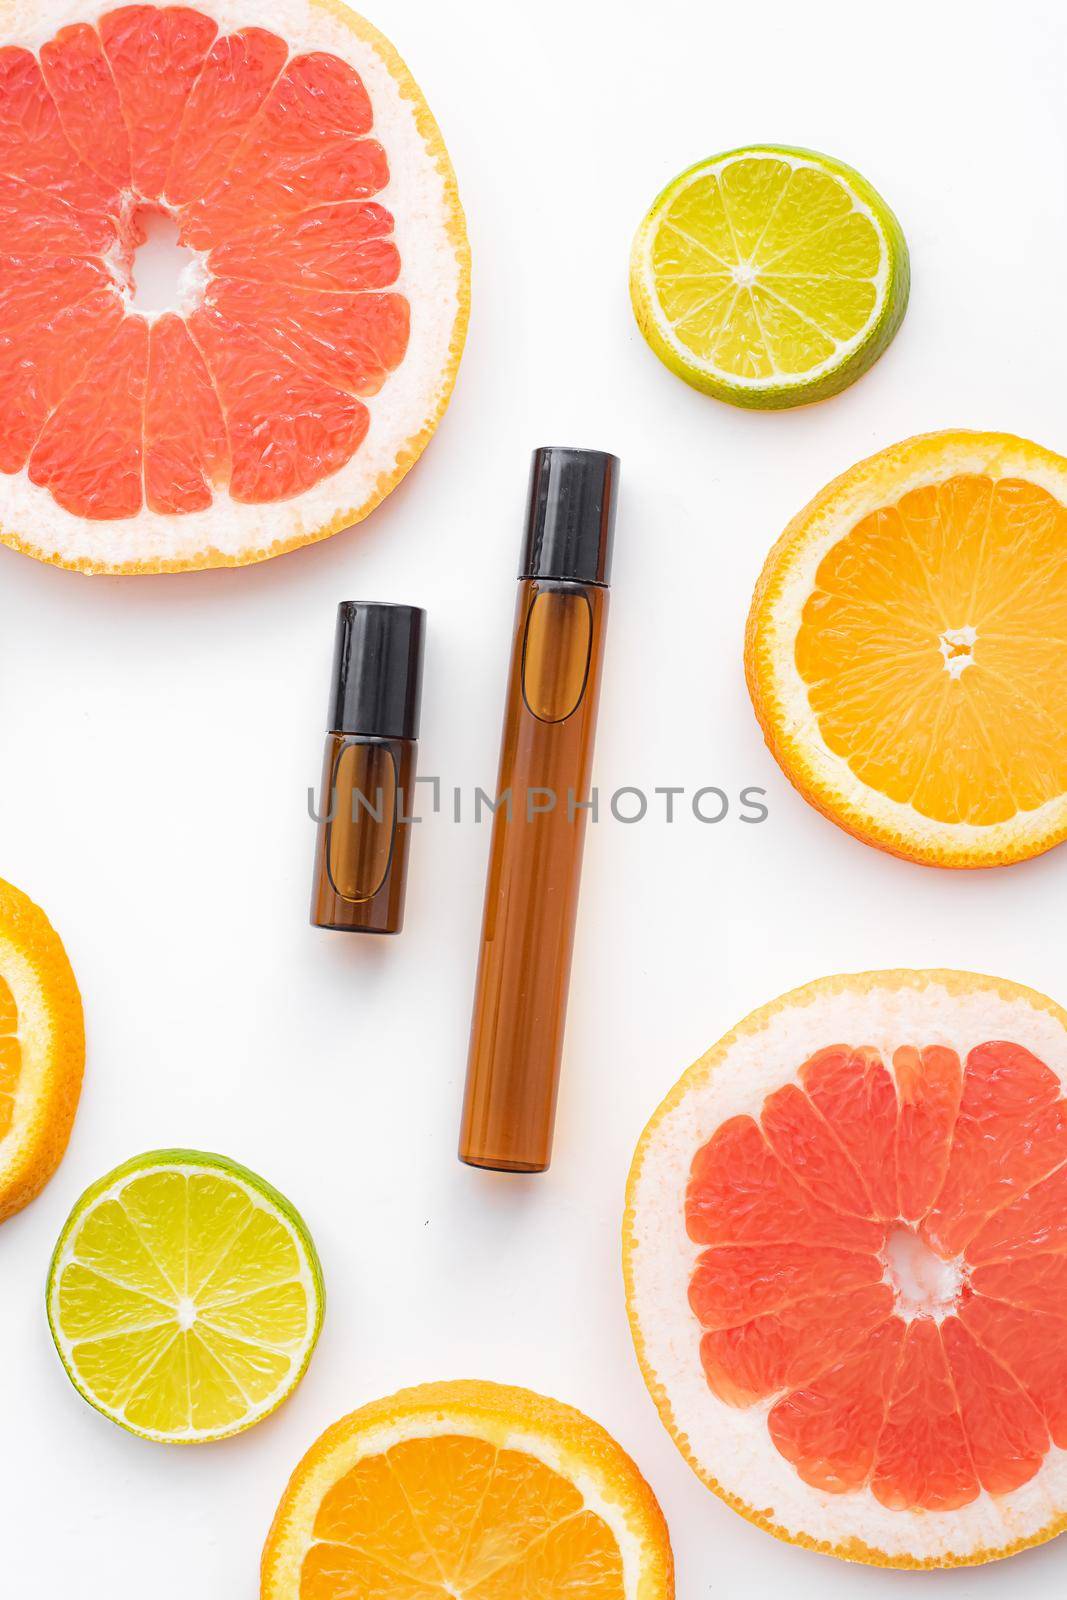 Cosmetic roller oil and citrus fruits . Cosmetic procedures. Healthy skin. Skin care. Citrus oil. White background. Copy space. Article about care cosmetics